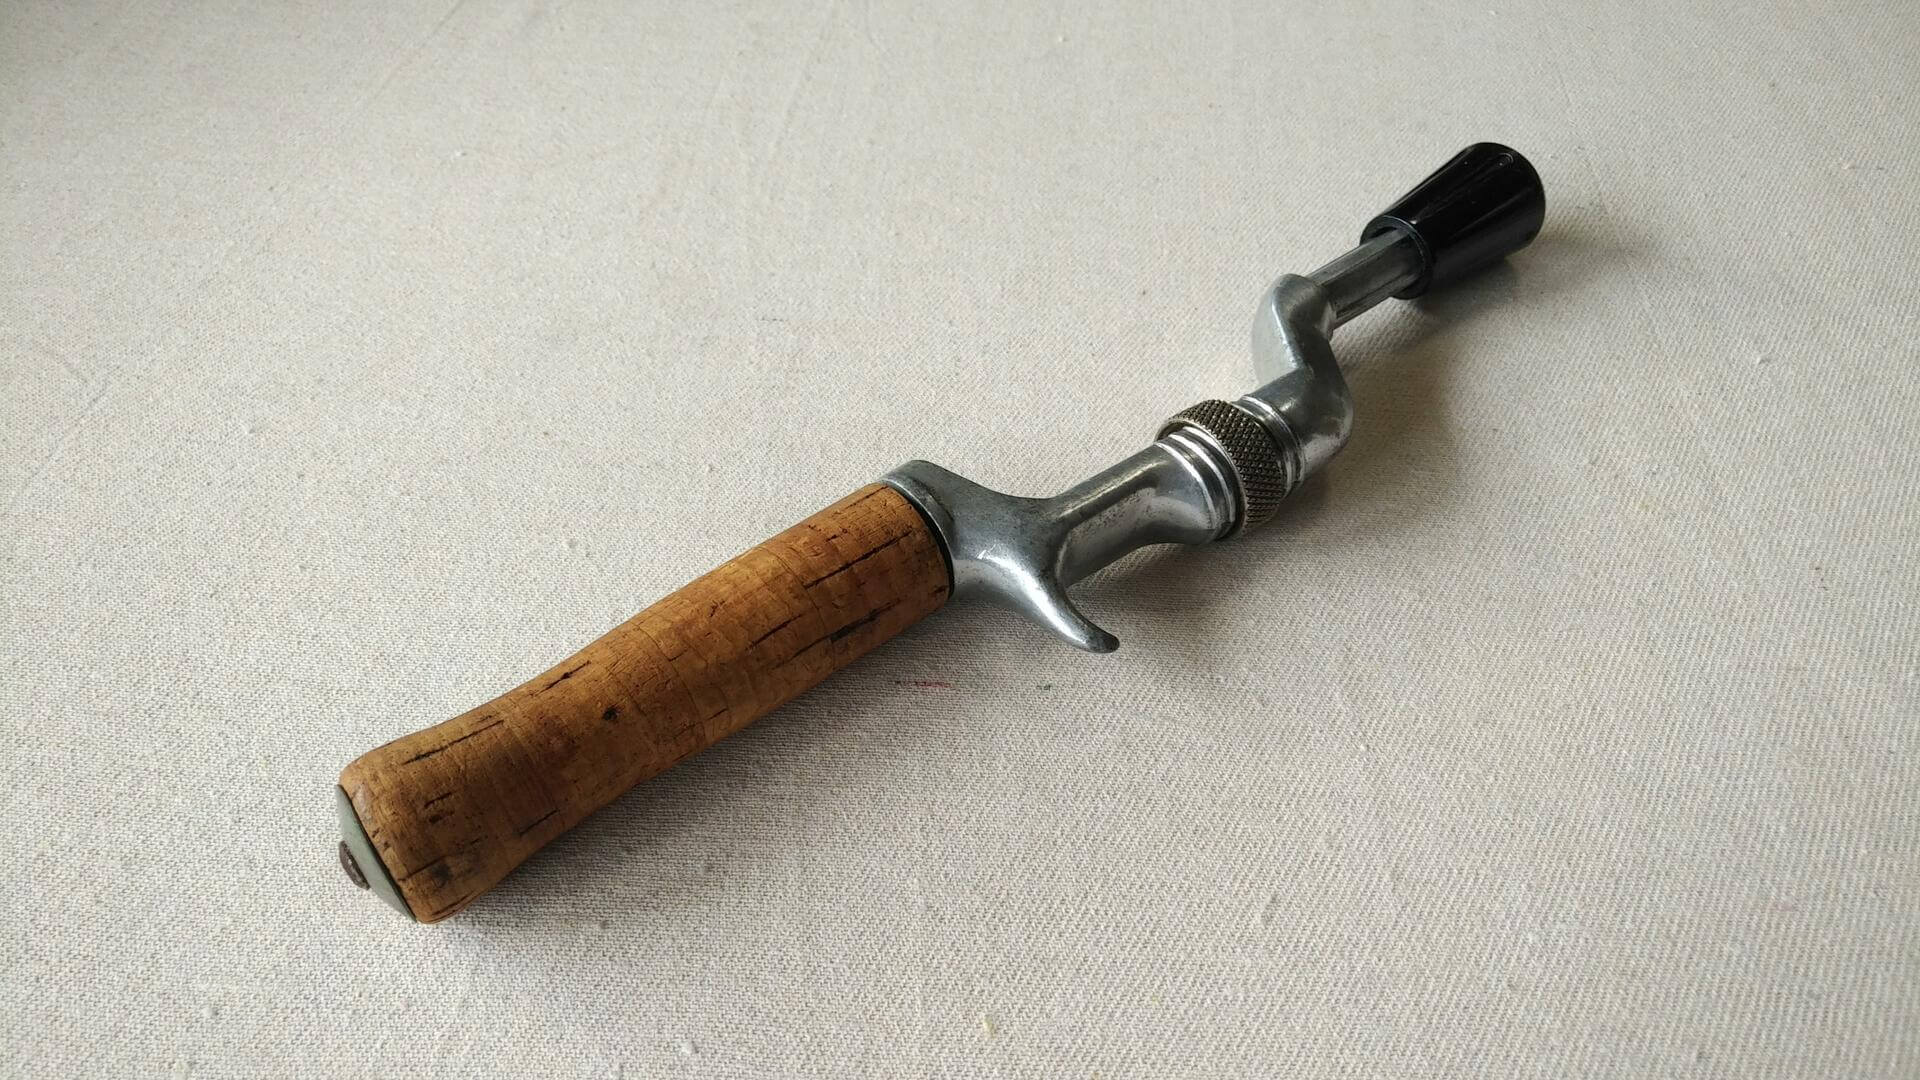 Vintage Dependun brand cast aluminum fishing rod handle with the cork handle. Mid century MCM collectible fishing and outdoors equipment and sporting goods